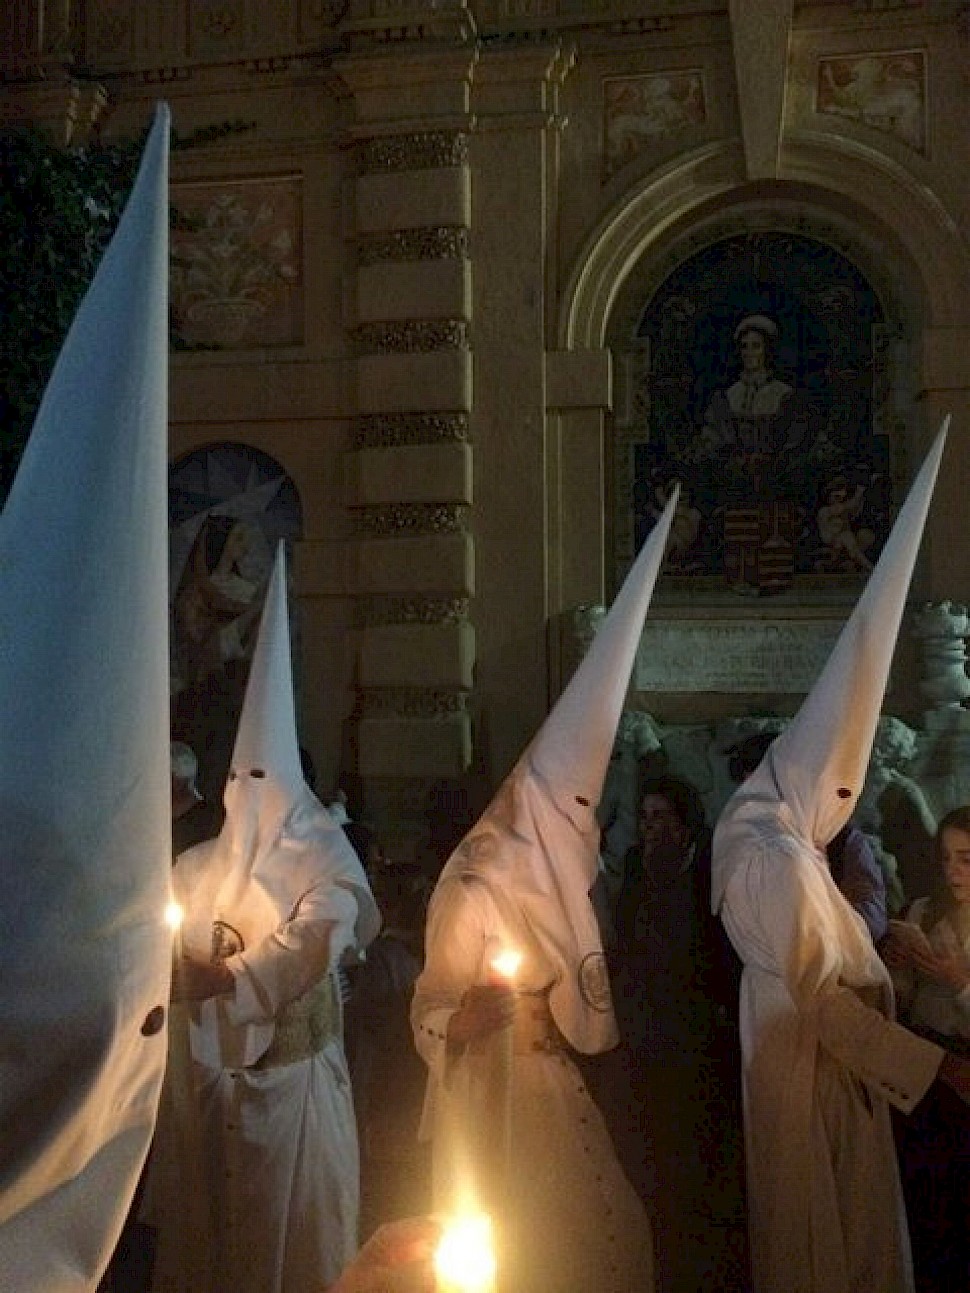 Nightly procession in the park